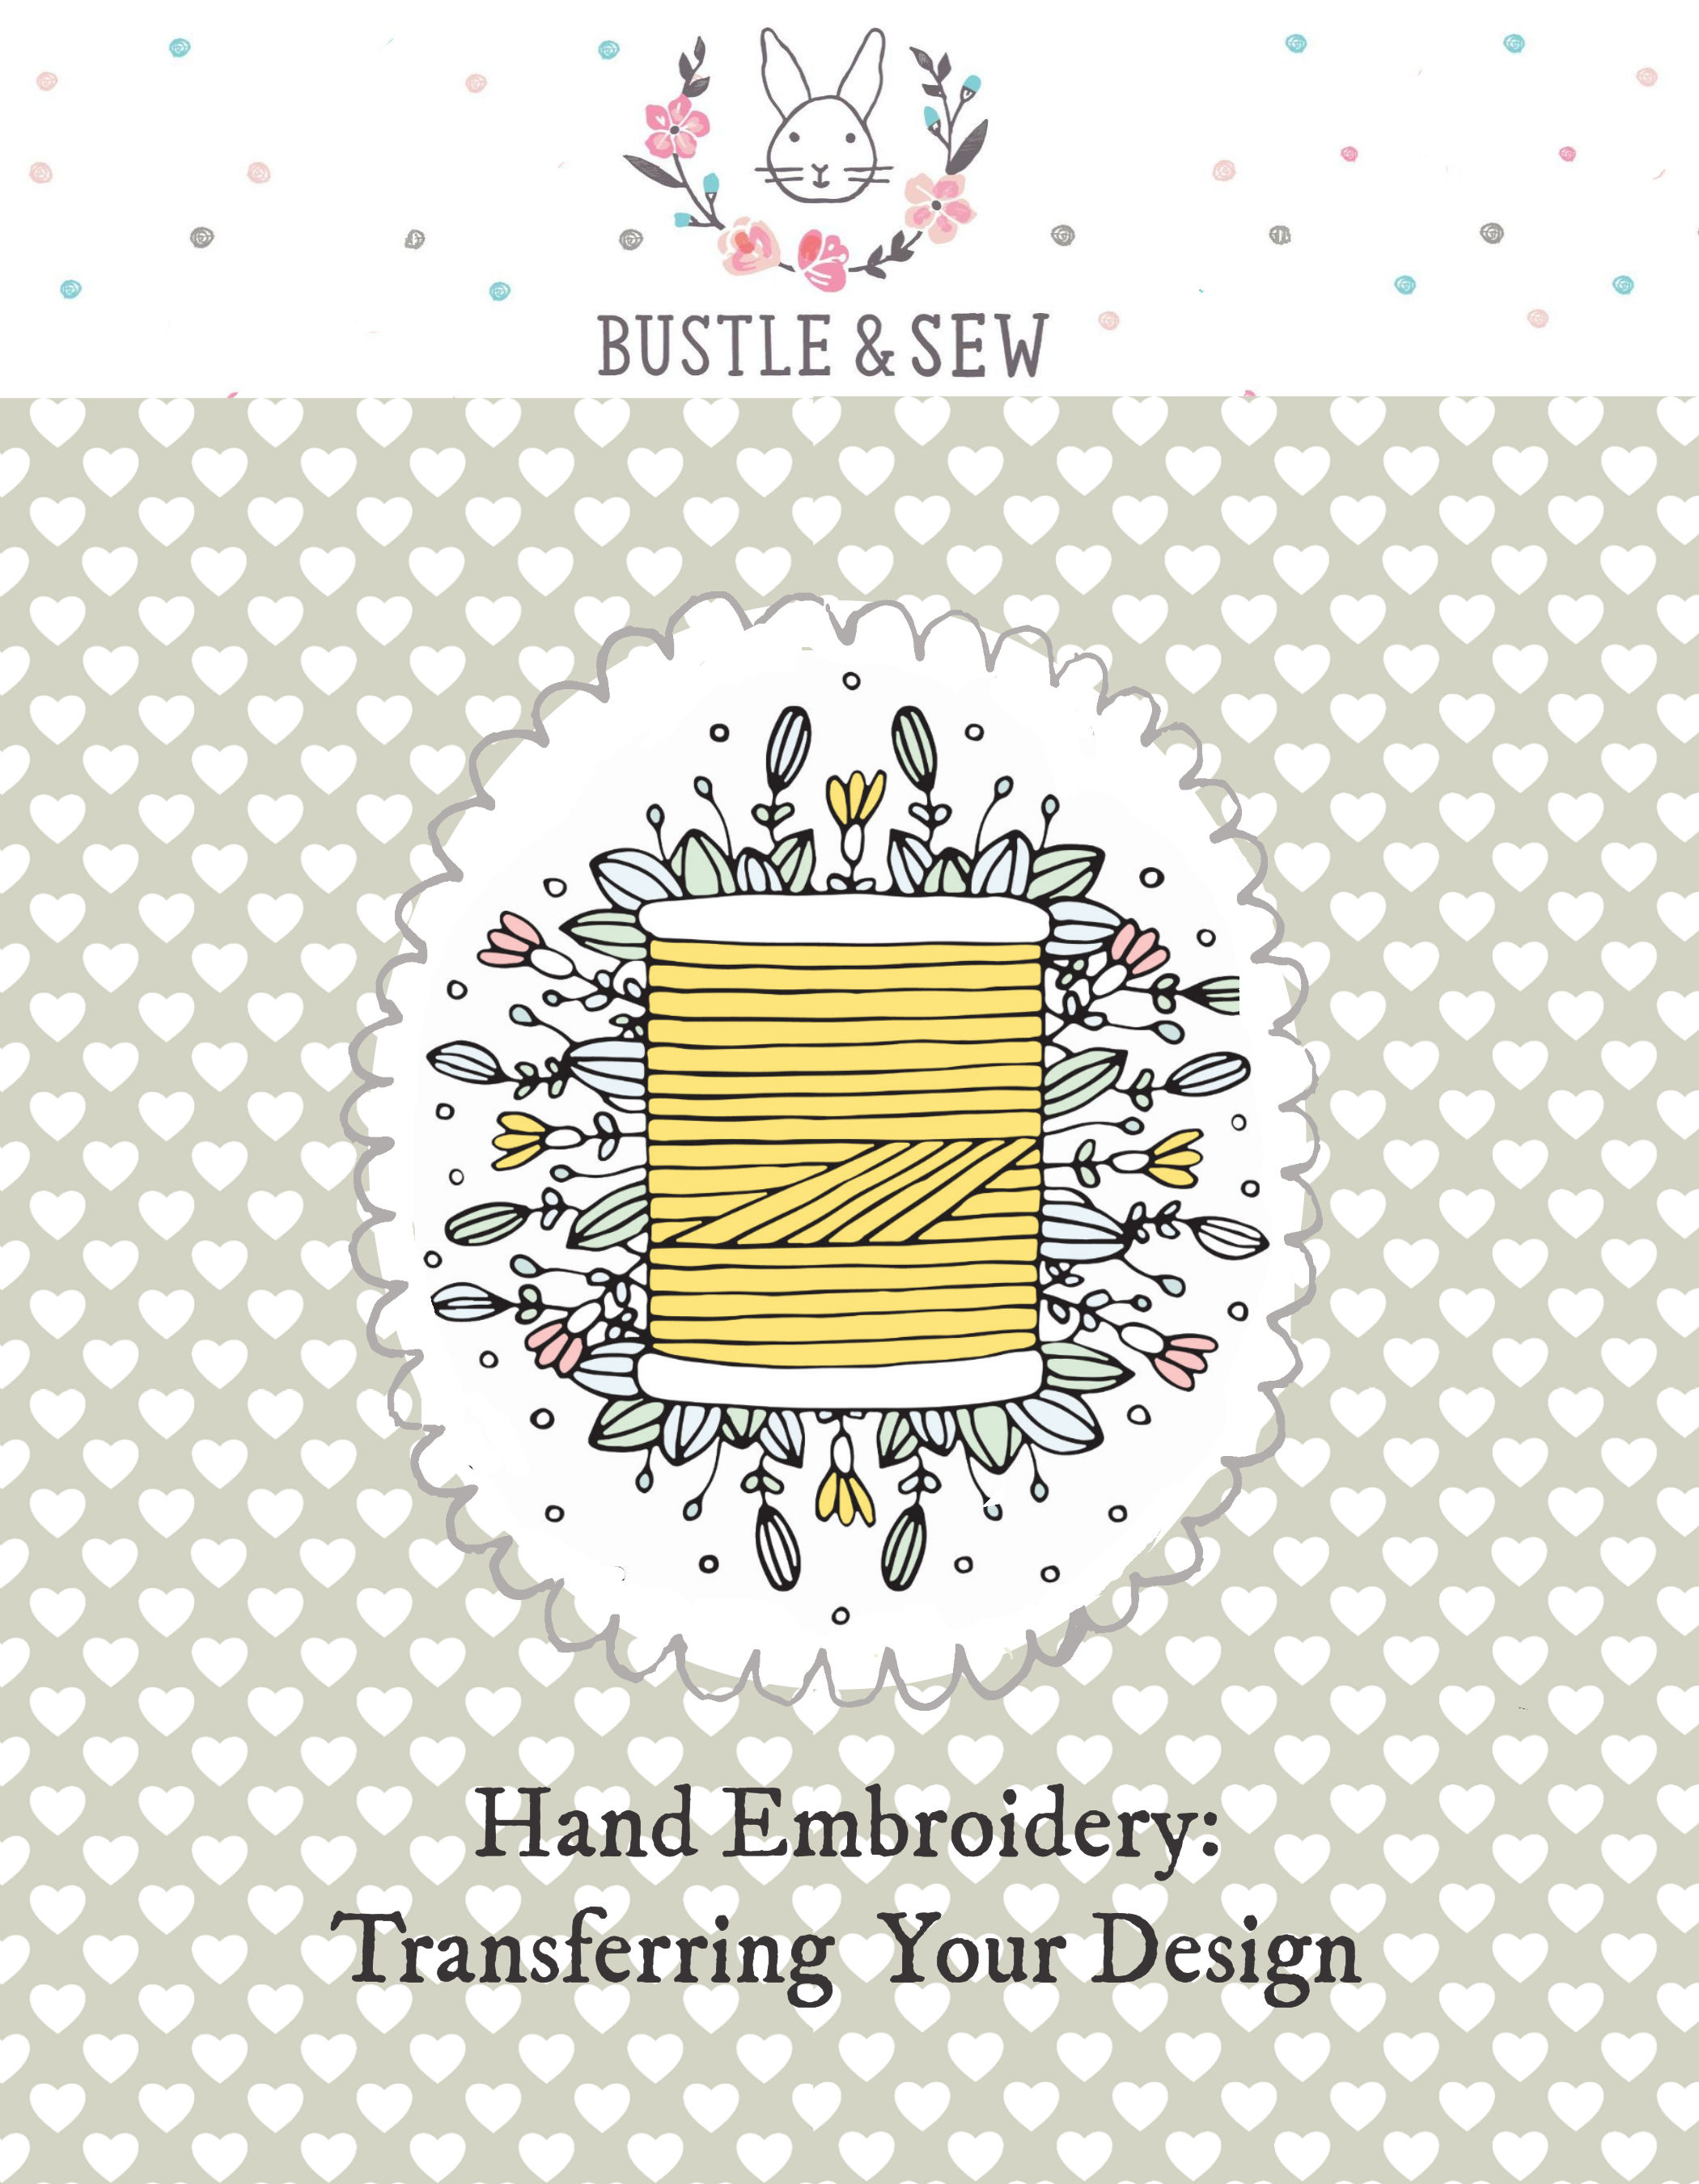 Hand Embroidery Patterns Transfers Transfer Your Pattern The Easy Way Bustle Sew